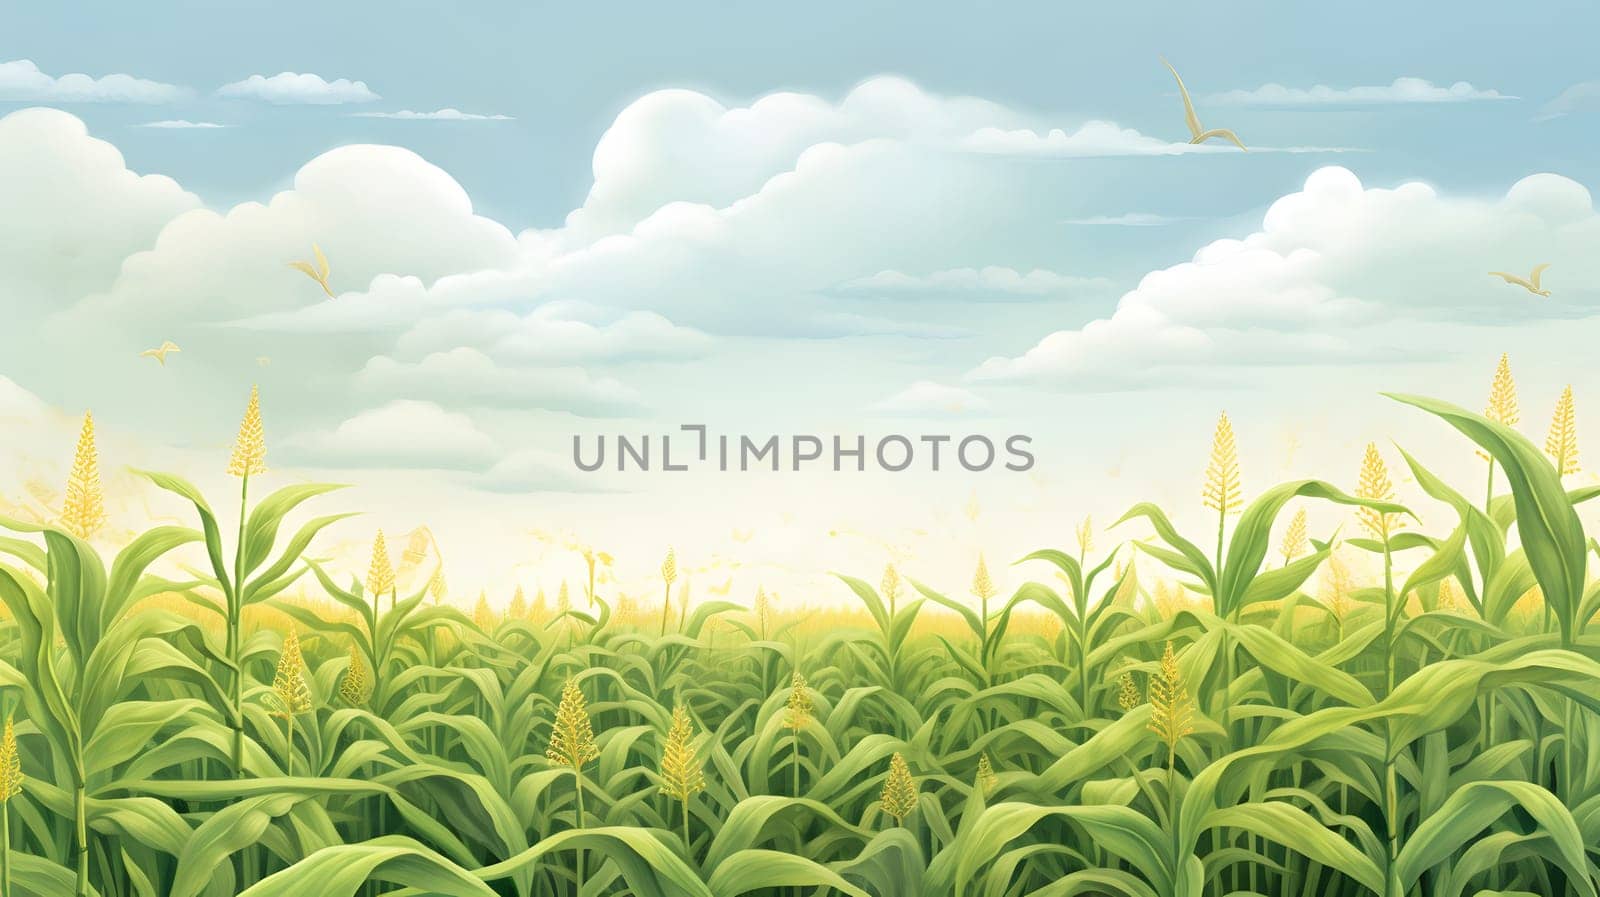 Endless corn field and sky with clouds., banner with space for your own content. Blurred background. Blank space for caption.